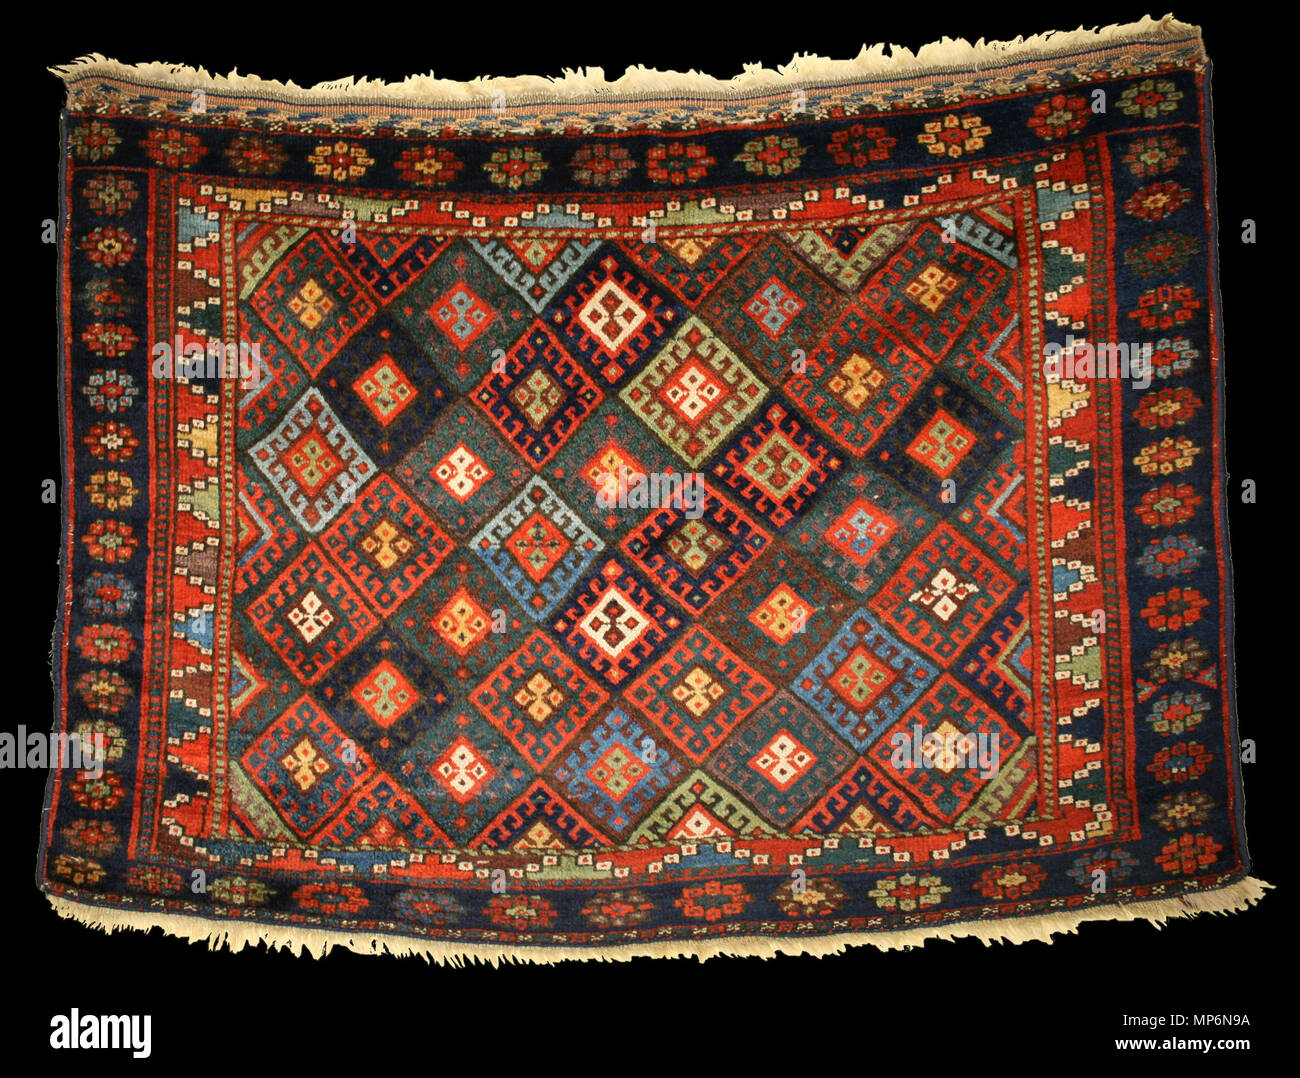 . English: Origin: Persian Jaf Kurdish Bag Size: 2.9 x 3.11 Date: ca. Mid 19th c The Jafs are a sub-tribe of the Kurdish and produce wonderfully distinctive diamond lattice pattern motifs on their rugs and bags. This bag-face has multiple rows of diamond motifs, each containing latch-hooks surrounding smaller crossed diamonds. The outer border is a single row of flowers. The whole piece is more colorful than most and is woven with exceptional wool. mid-19th century. Made by unknown Kurdish weaver. Photo by gallery 690 Jaf-Kurd bag Stock Photo